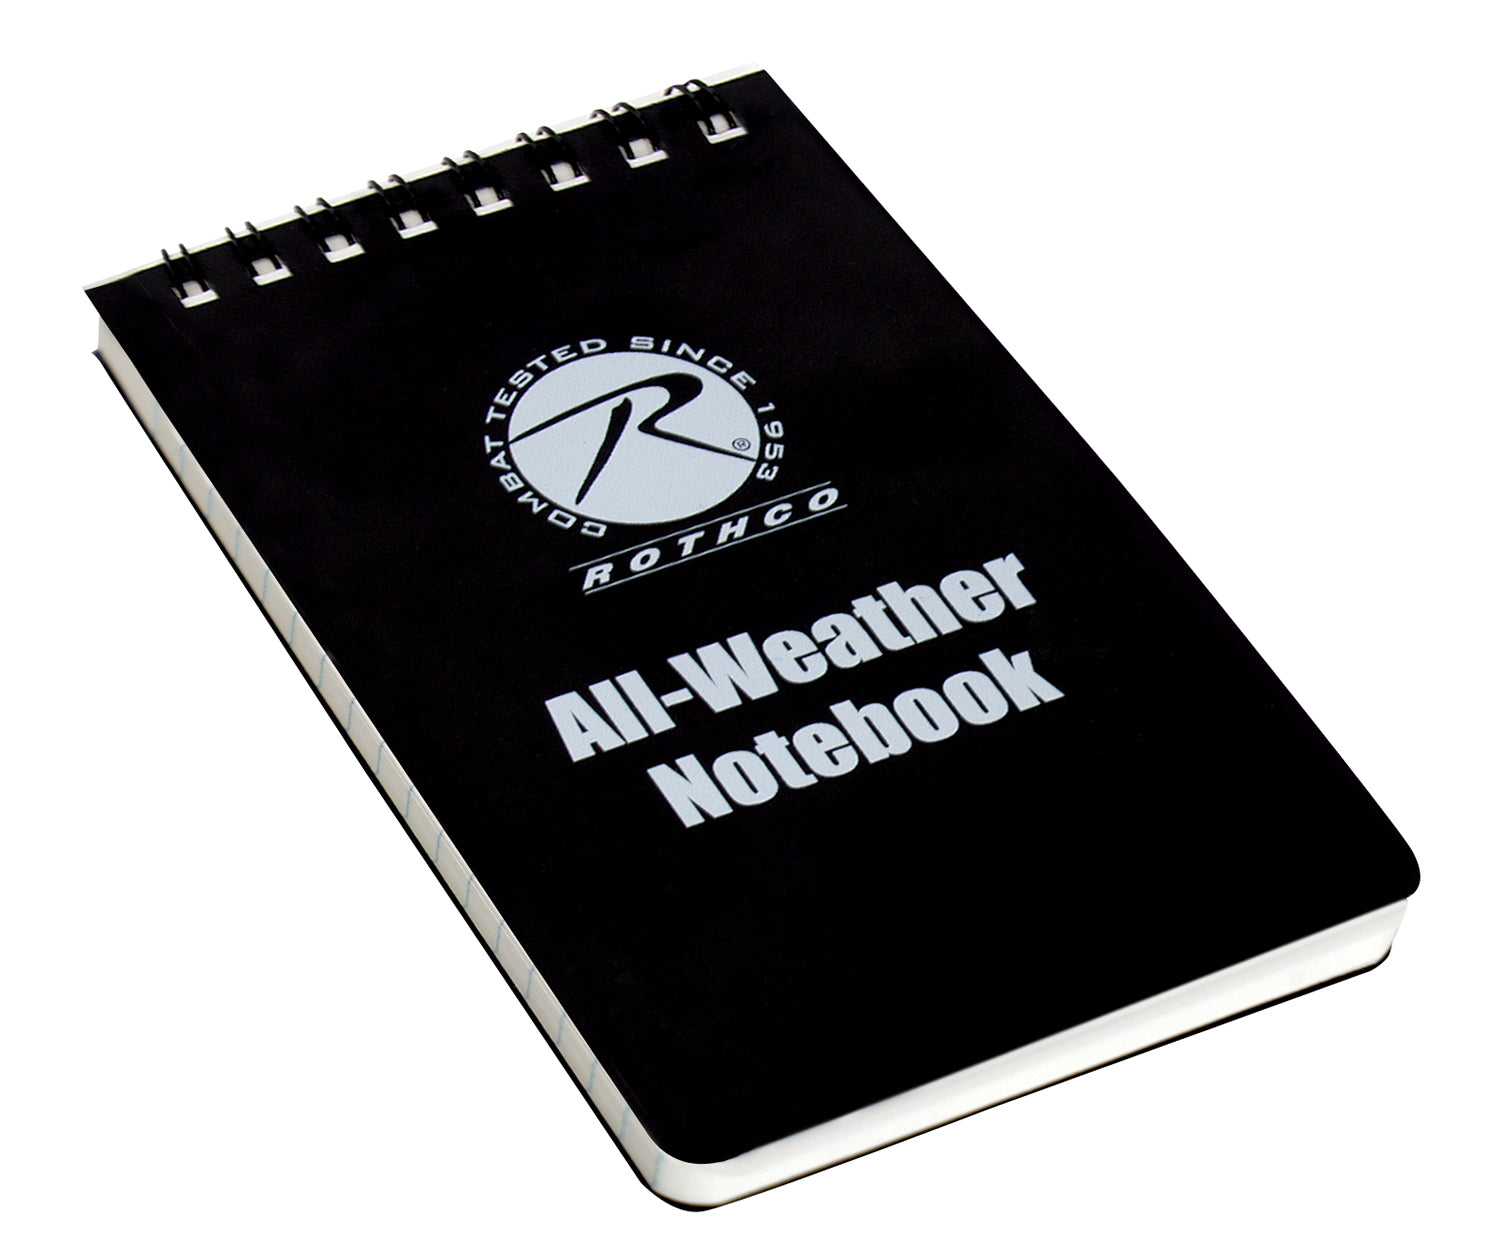 All-Weather Waterproof Notebook - Tactical Choice Plus